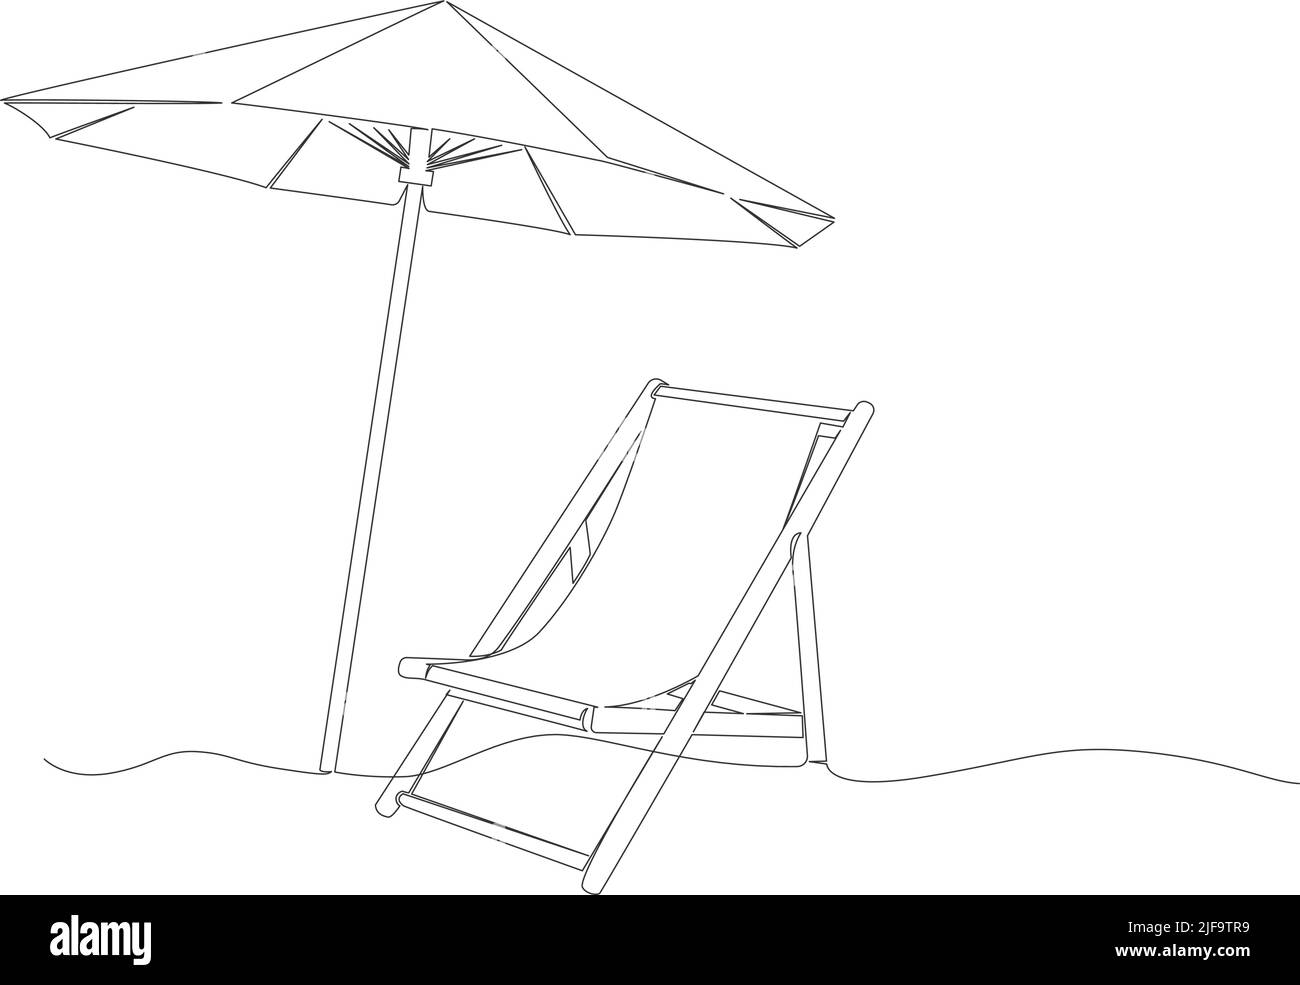 sinlge line drawing of parasol and beach chair isolated on white background, line art vector illustration Stock Vector